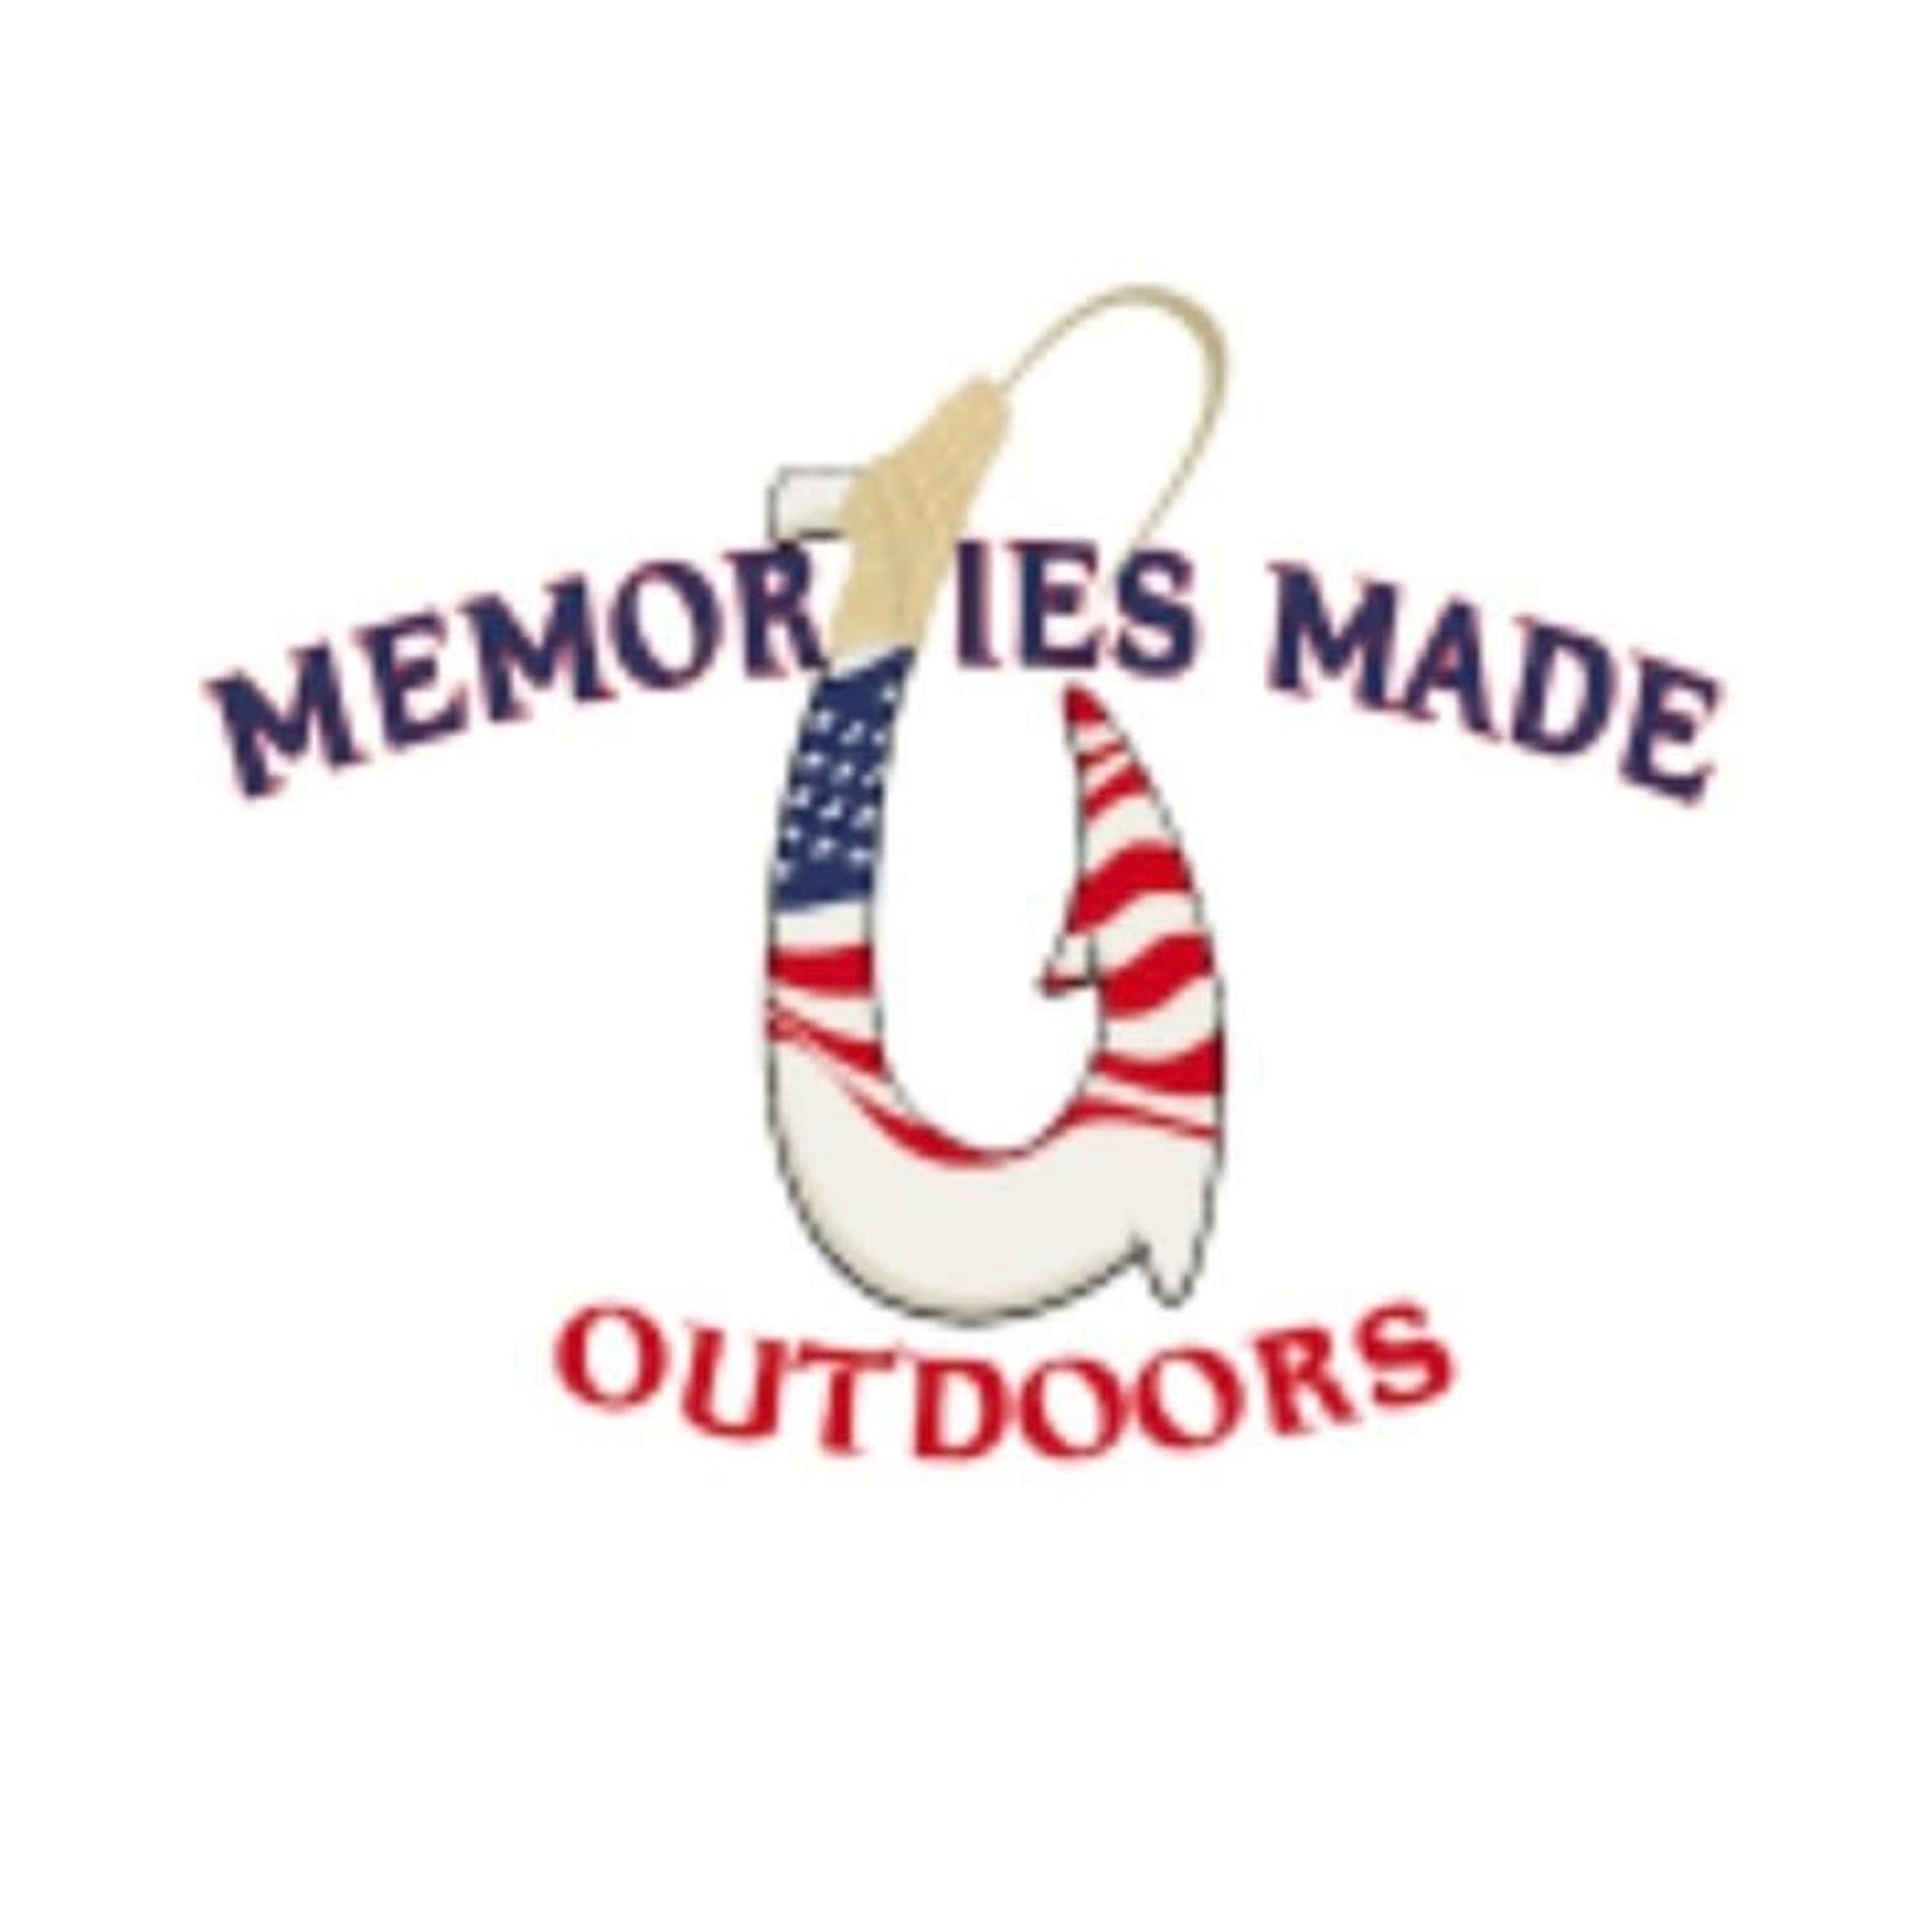 Making Memories Made Outdoors with Ryan Street